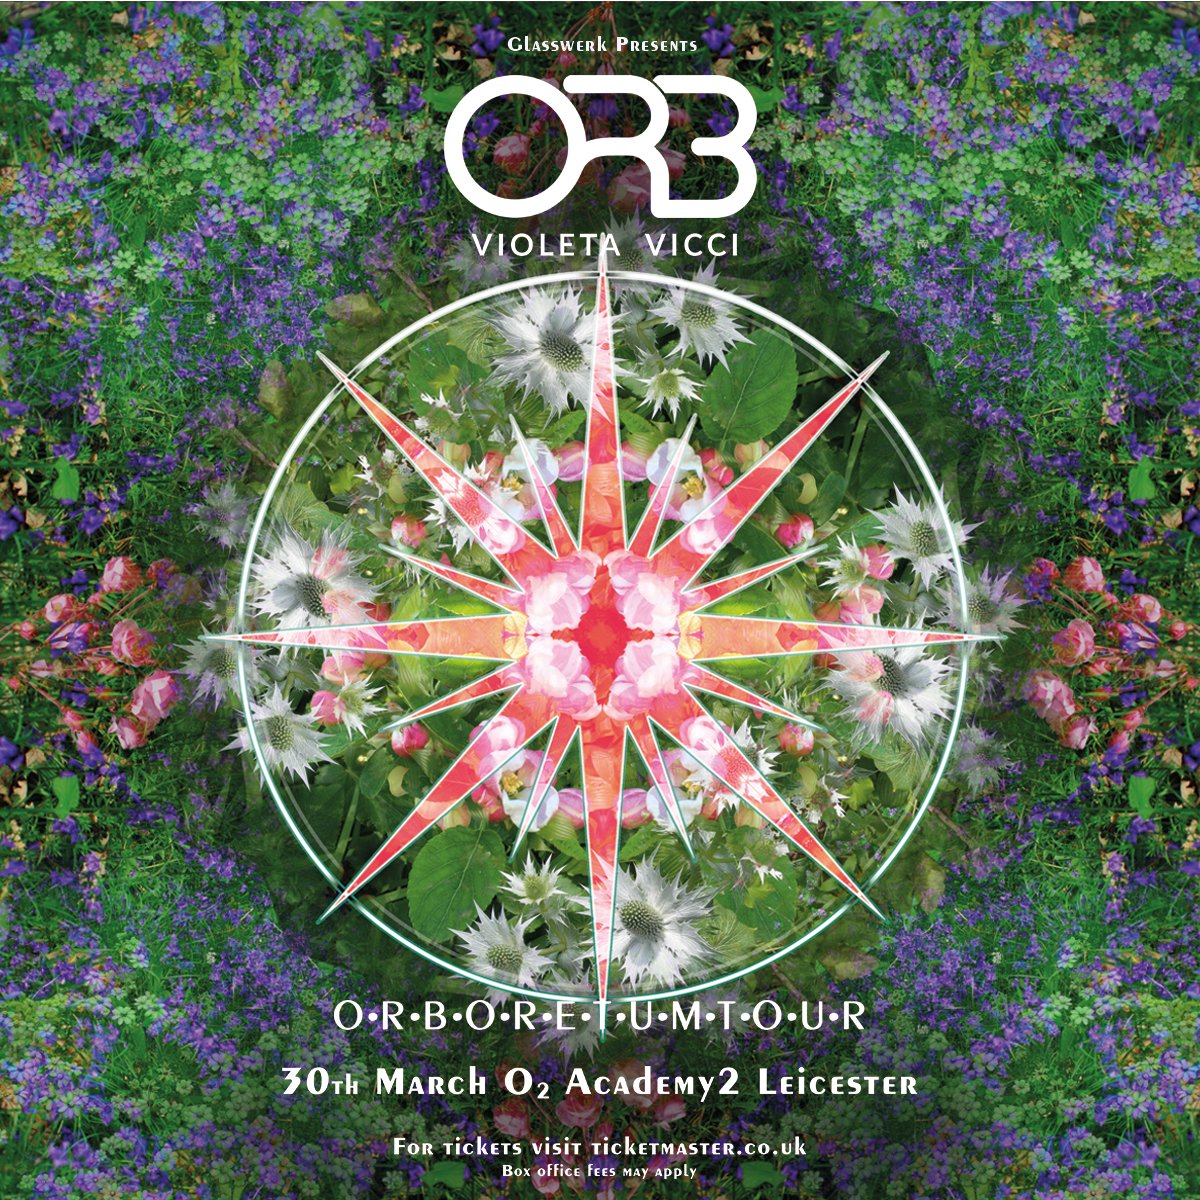 So excited to see electronic music pioneers @orbinfo tonight on the 'Orboretum Tour.' 🙌Doors at 7pm. Our usual security measures are in place - no bags bigger than A4 - please check our pinned tweet for details 🙏